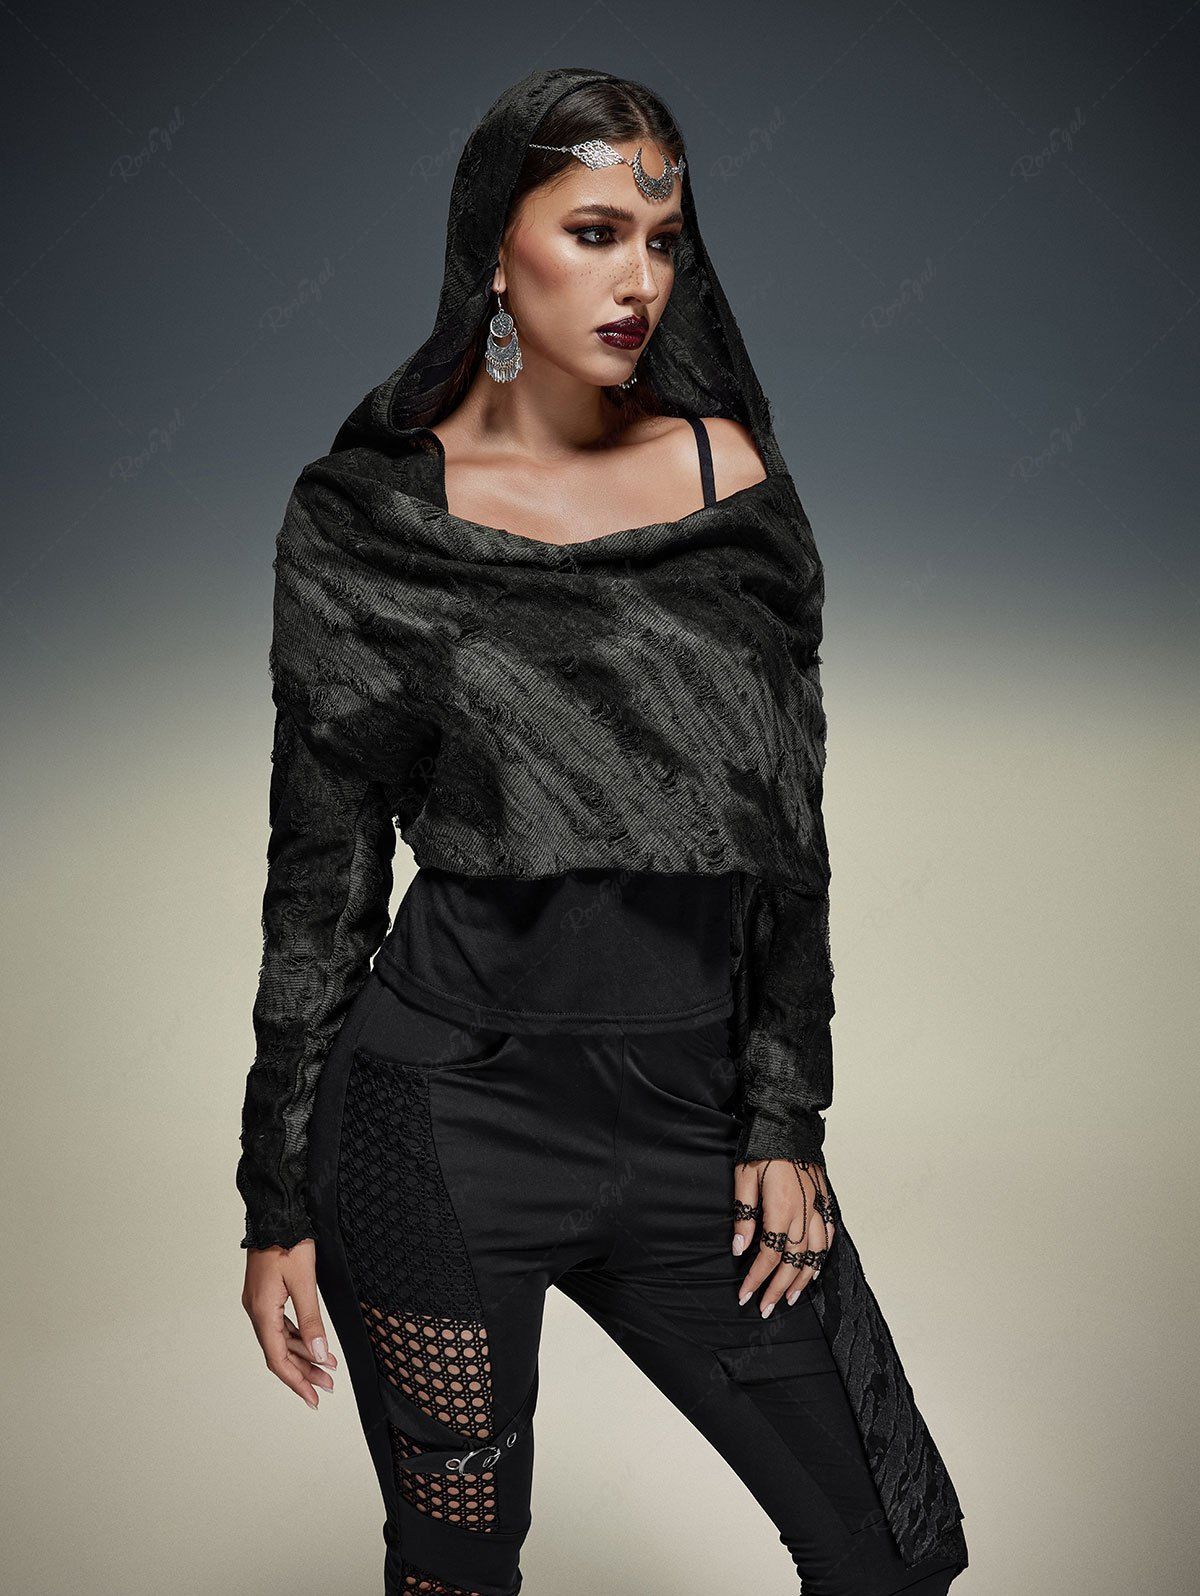 Gothic Tie Dye Ripped Hooded Asymmetric Tops